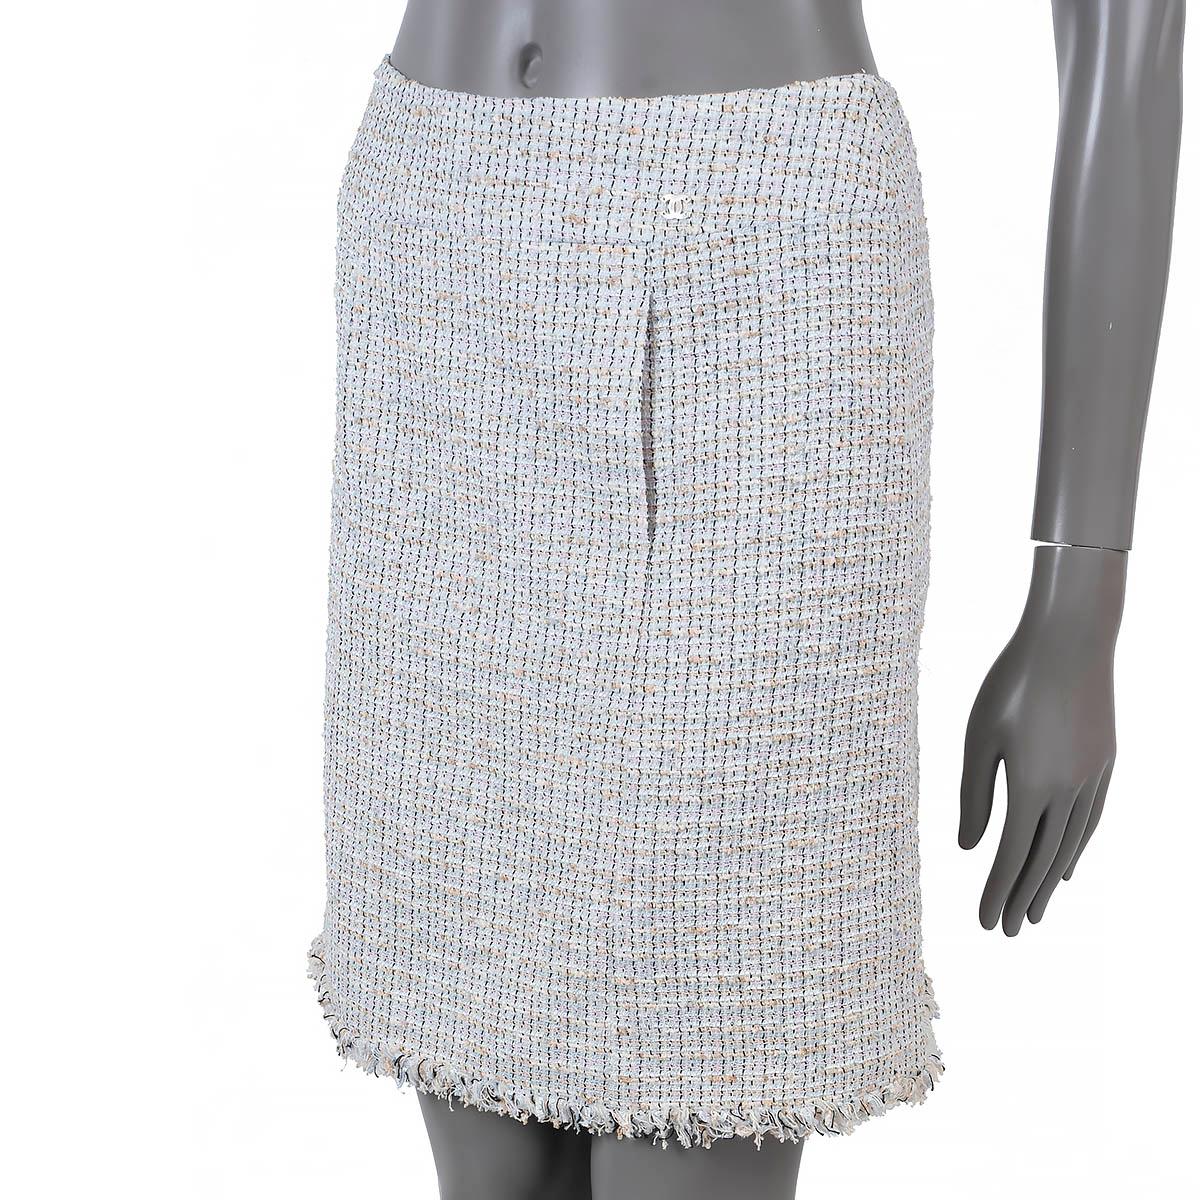 100% authentic Chanel above-knee tweed skirt in baby blue, beige and pink cotton (55%), polyester (27%) and nylon (18%). Features two slit pockets and a fringed bottom hem. Closes with a concealed zipper in the back and is lined in silk (100%). Has